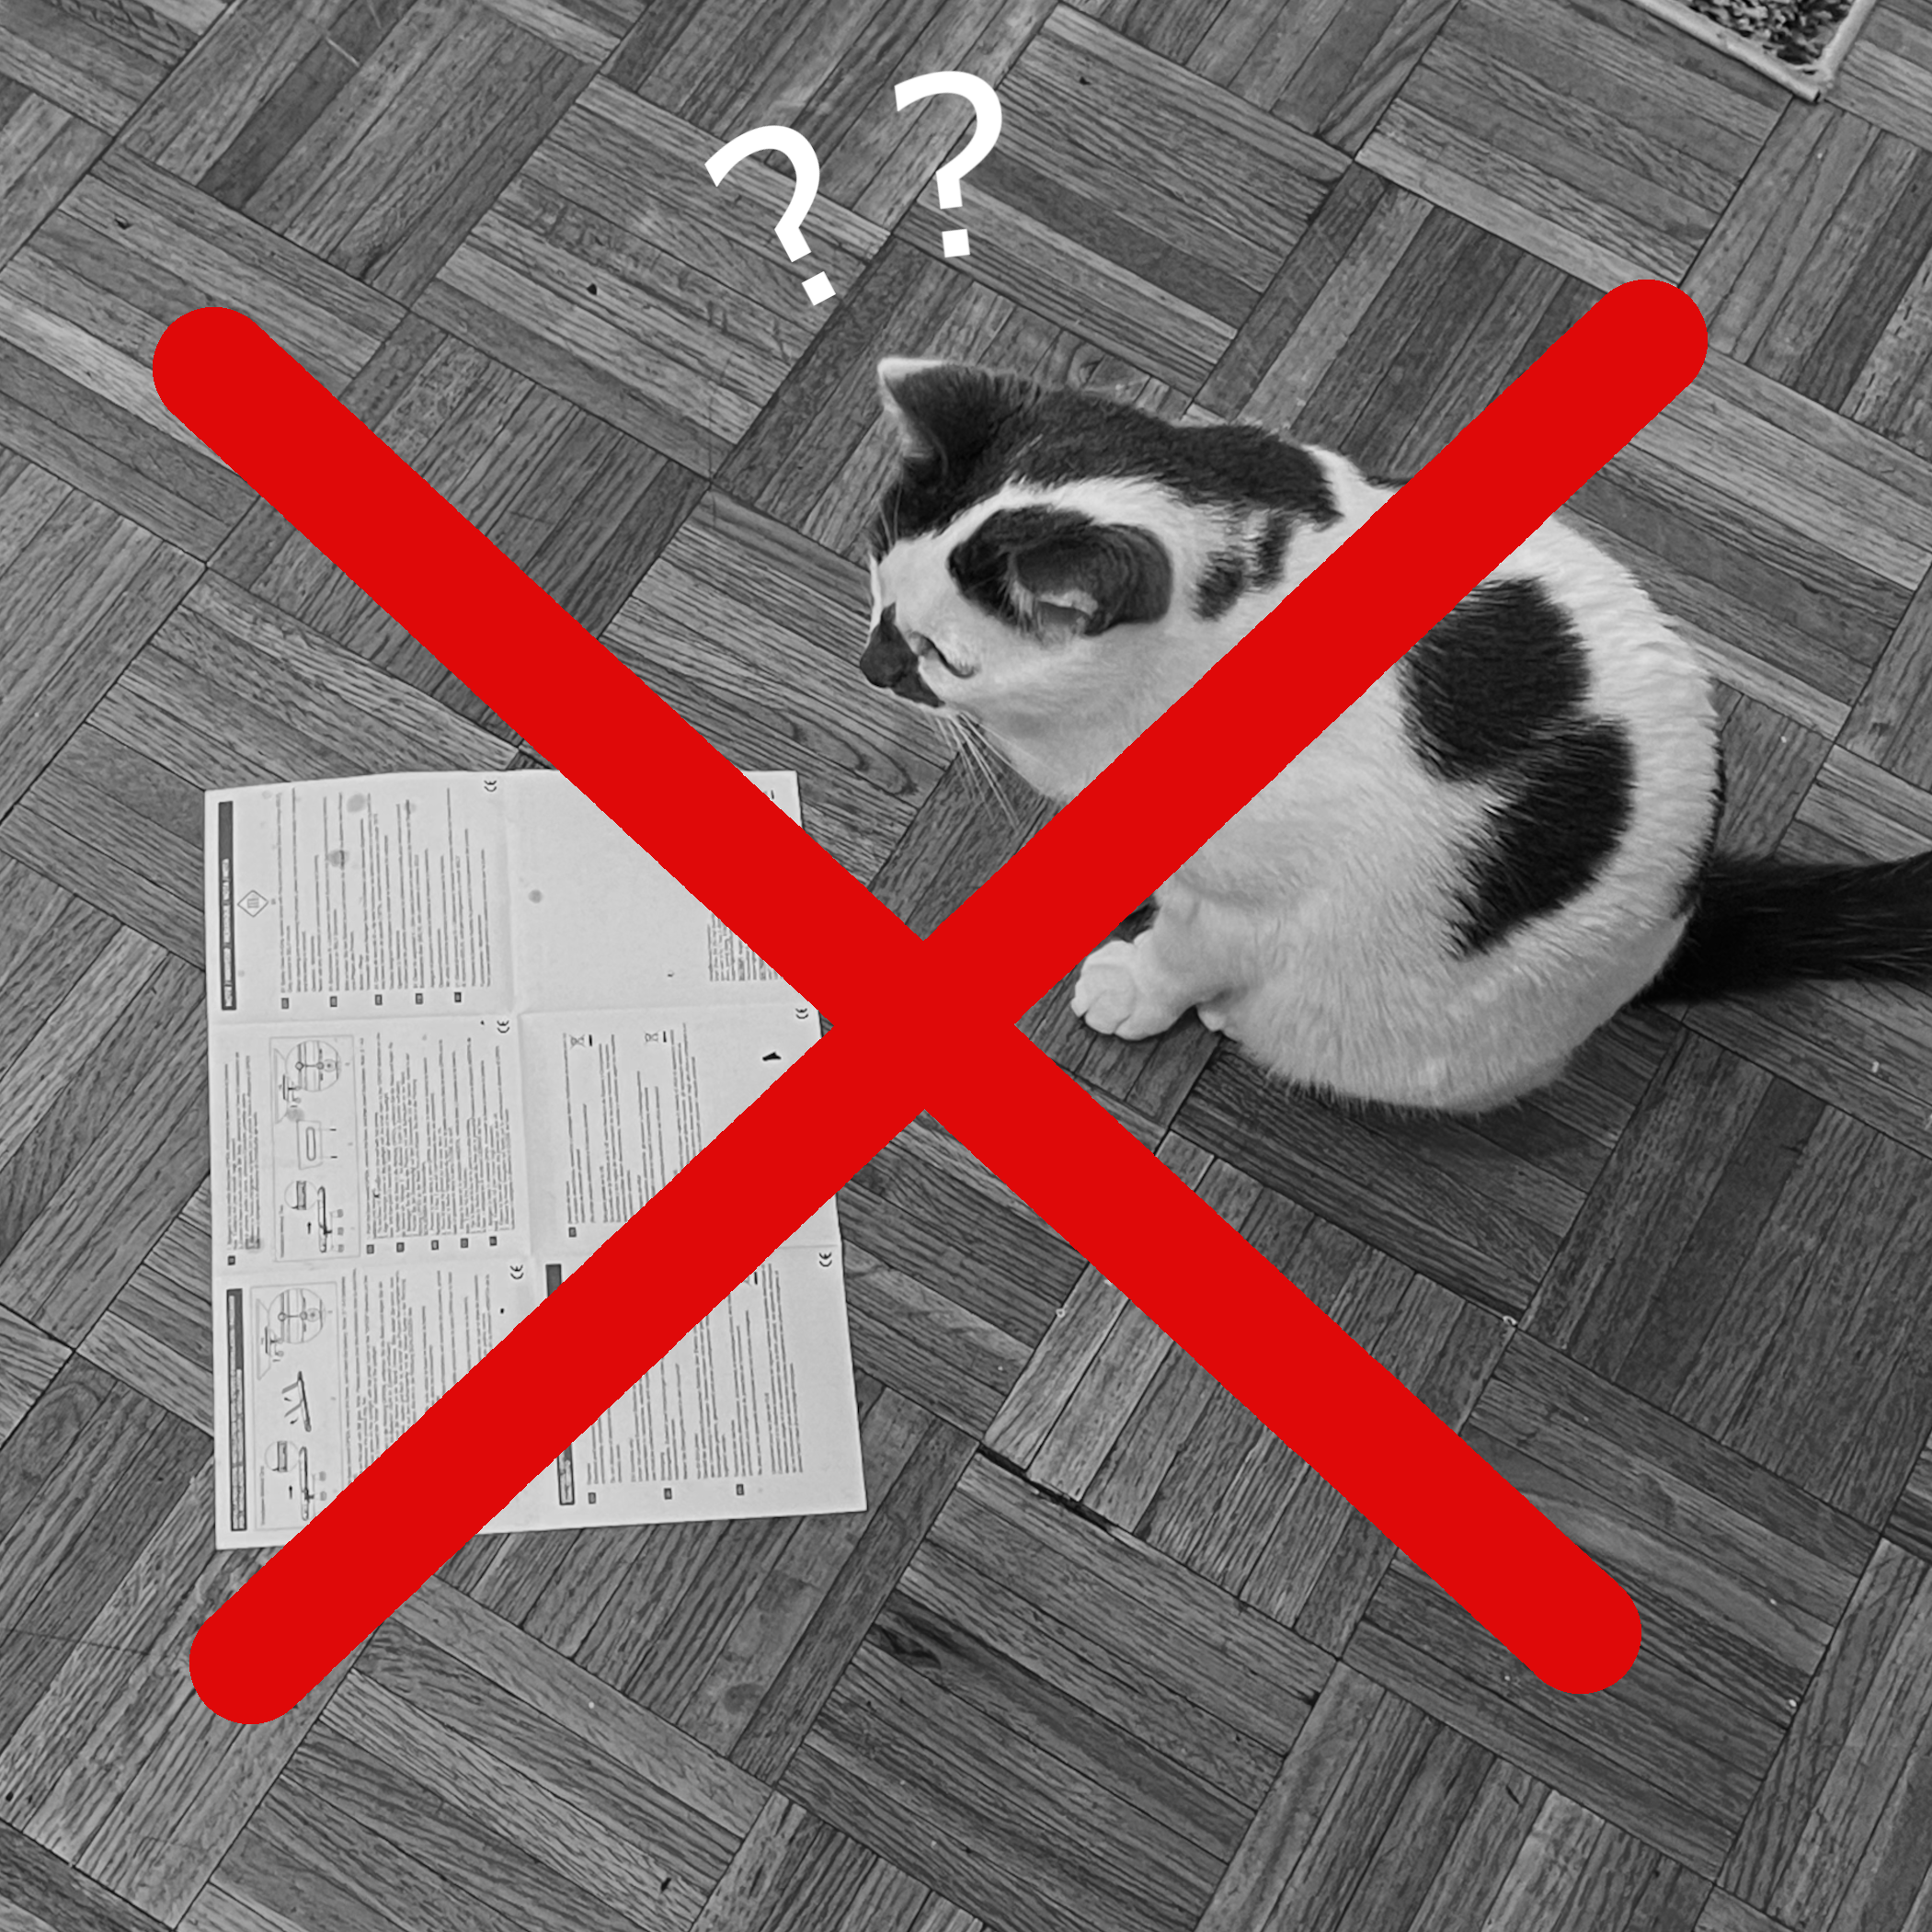 A confused cat staring down a poorly-written instruction manual